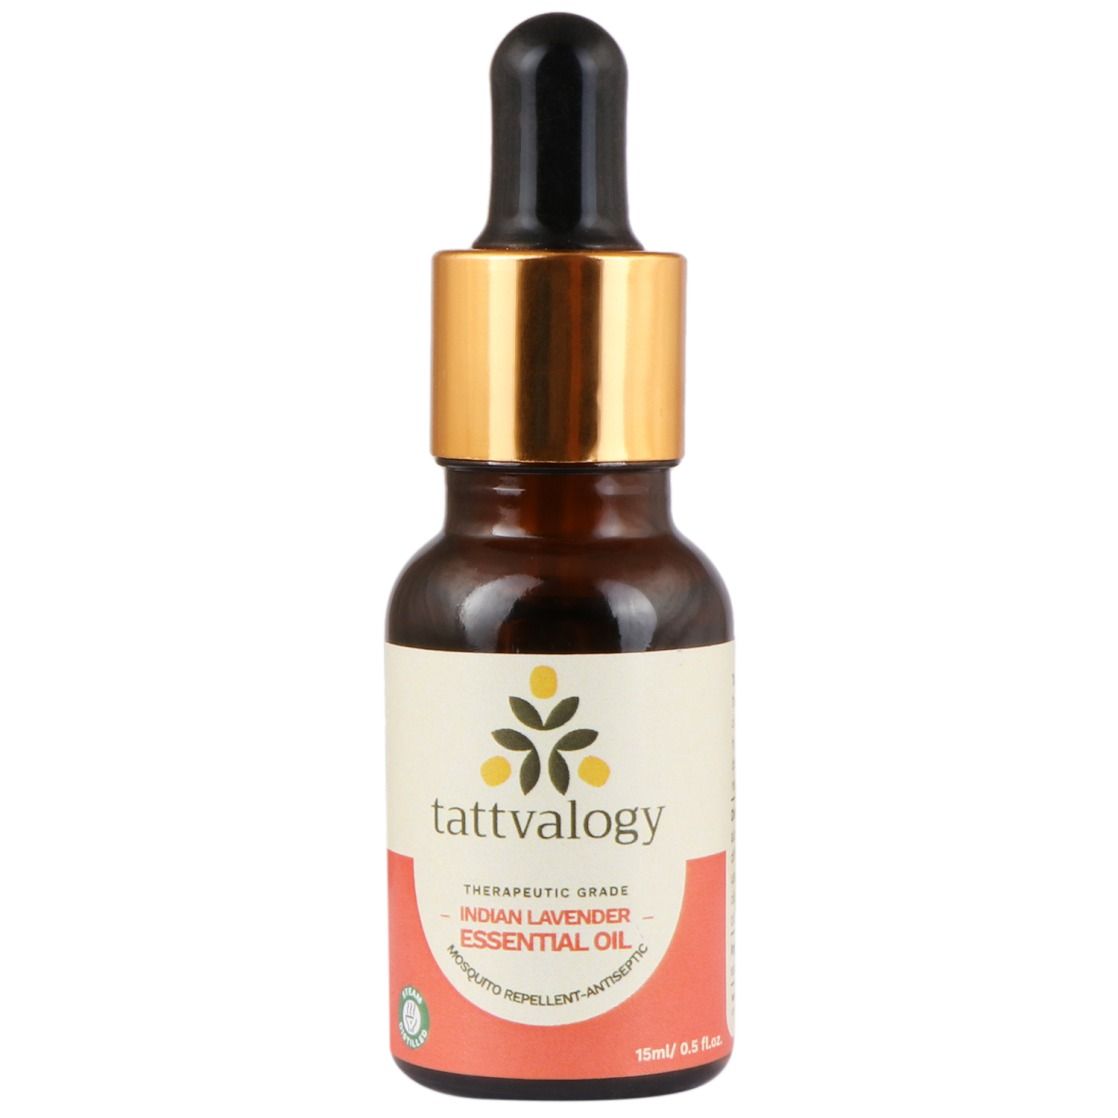 Tattvalogy Therapeutic Grade Indian Lavender Essential Oil, Natural Undiluted for Skin, Hair